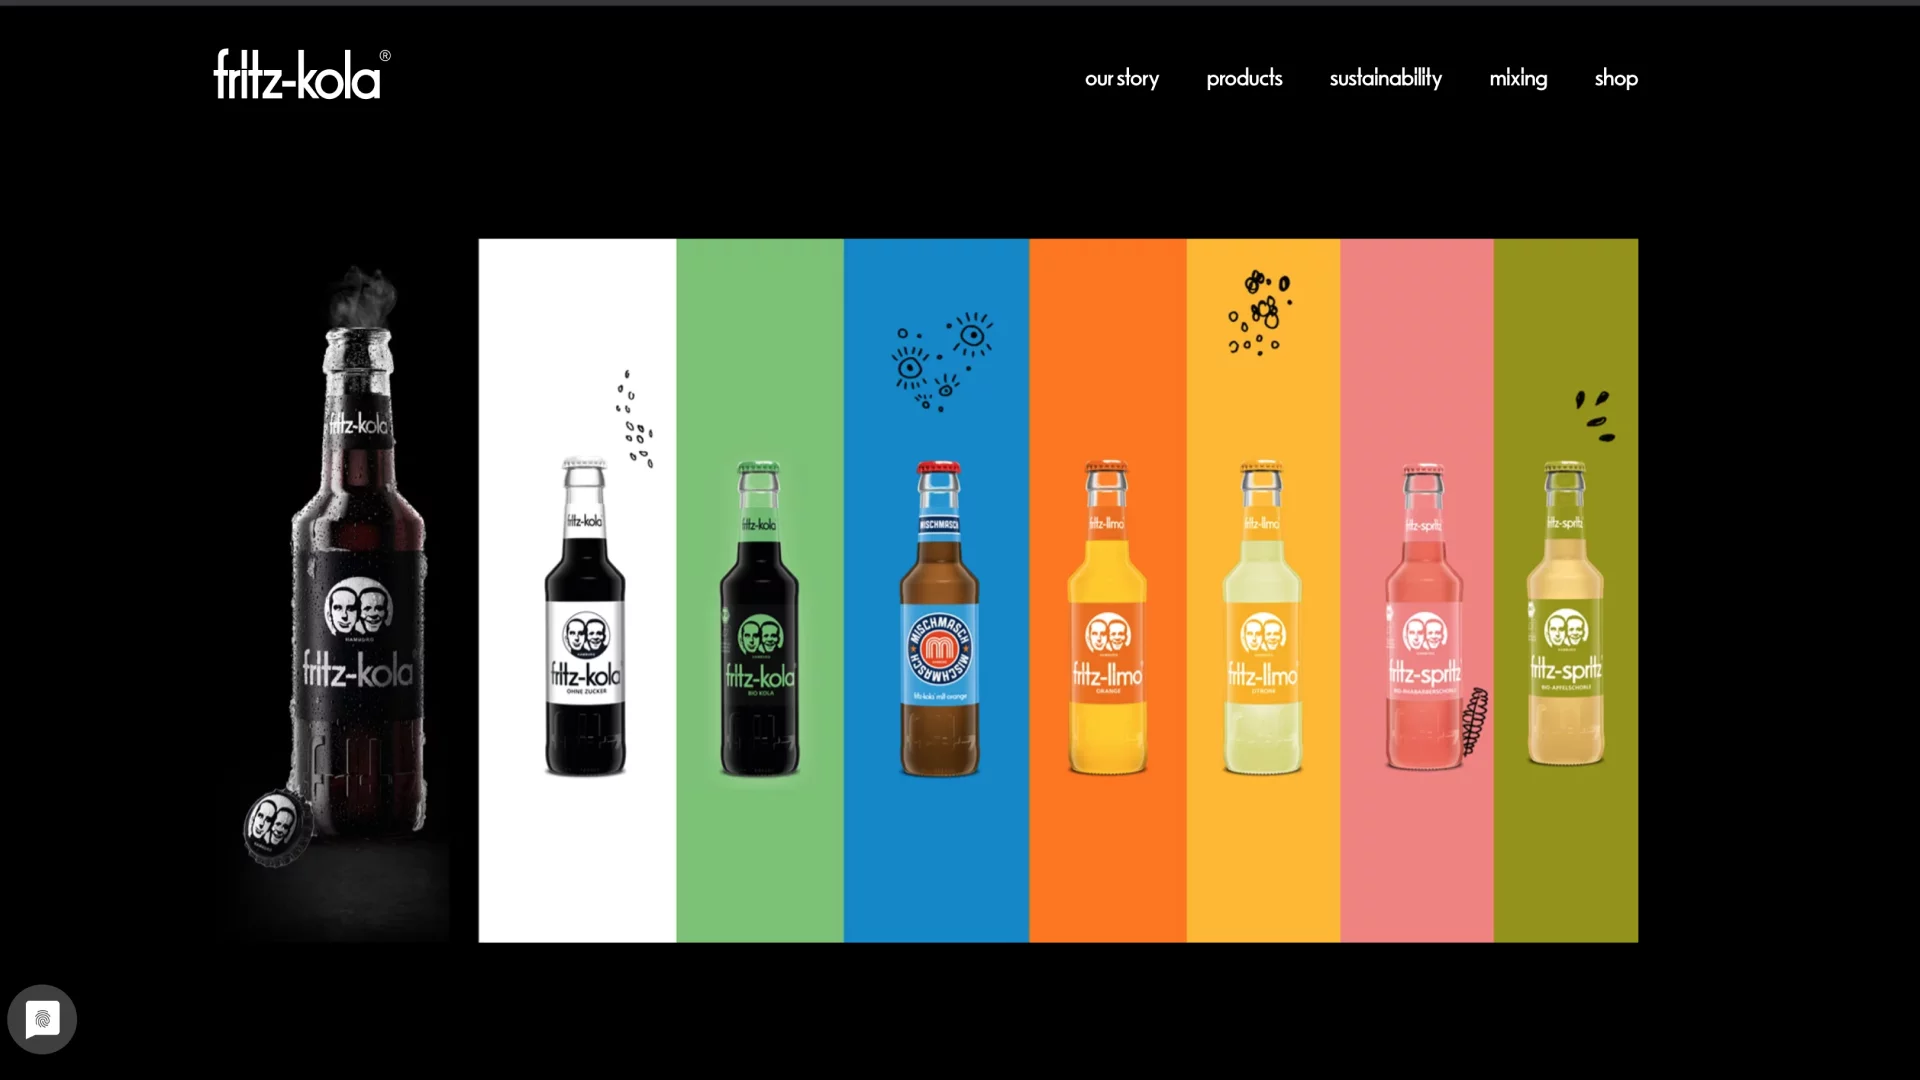 Case Study: fritz-kola Conquers the International Market With the Launch of the .com Website  